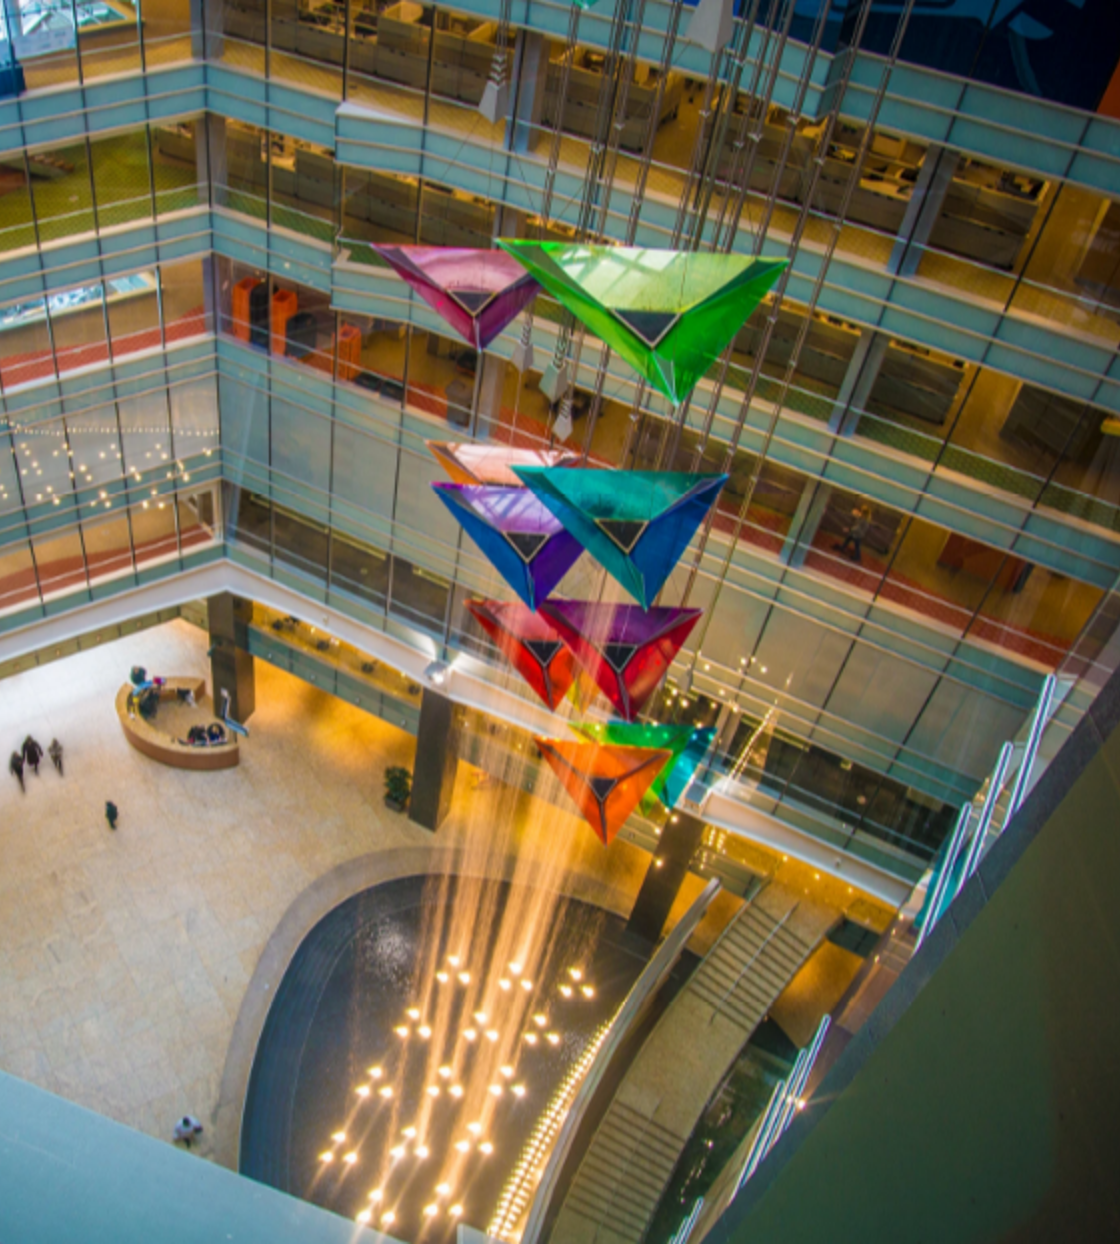 The lobby of the One Campus Martius building in Detroit, where Rocket Companies is headquartered, features a large, hanging water feature that looks like colorful kites.